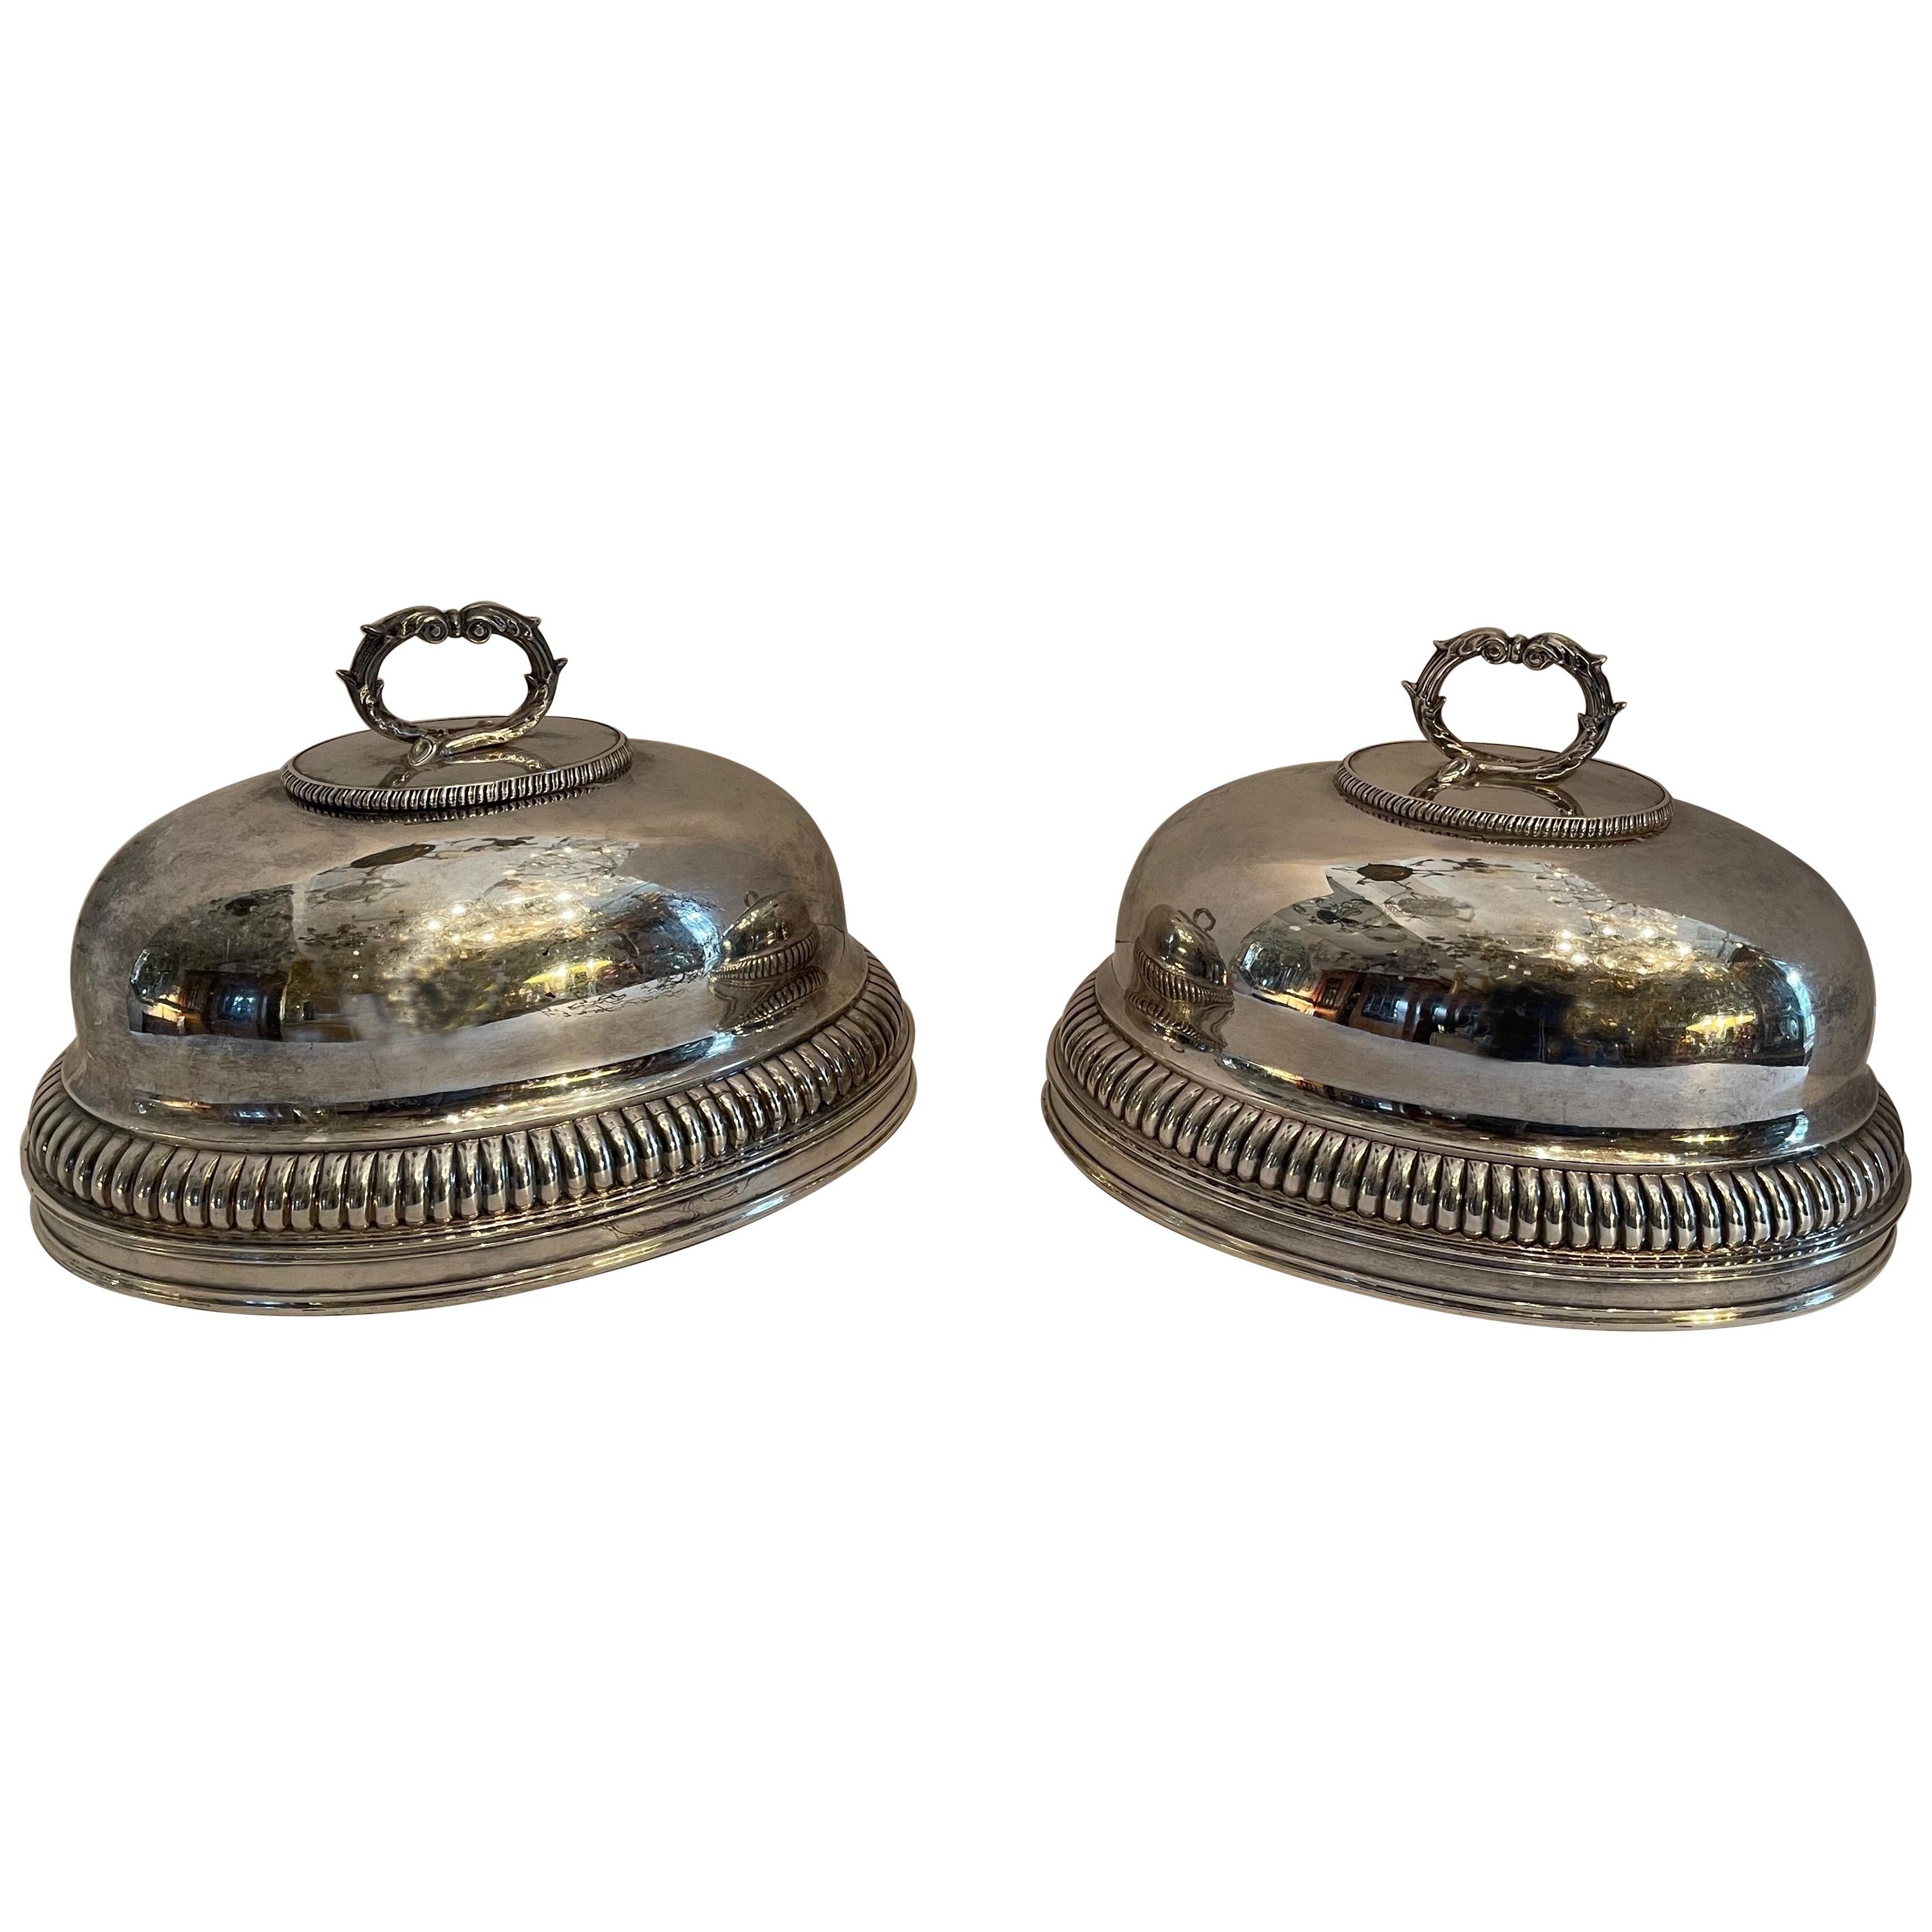 Fine English Silver Plated Pair Meat Food Dome Cover Sheffield Serving Cloche